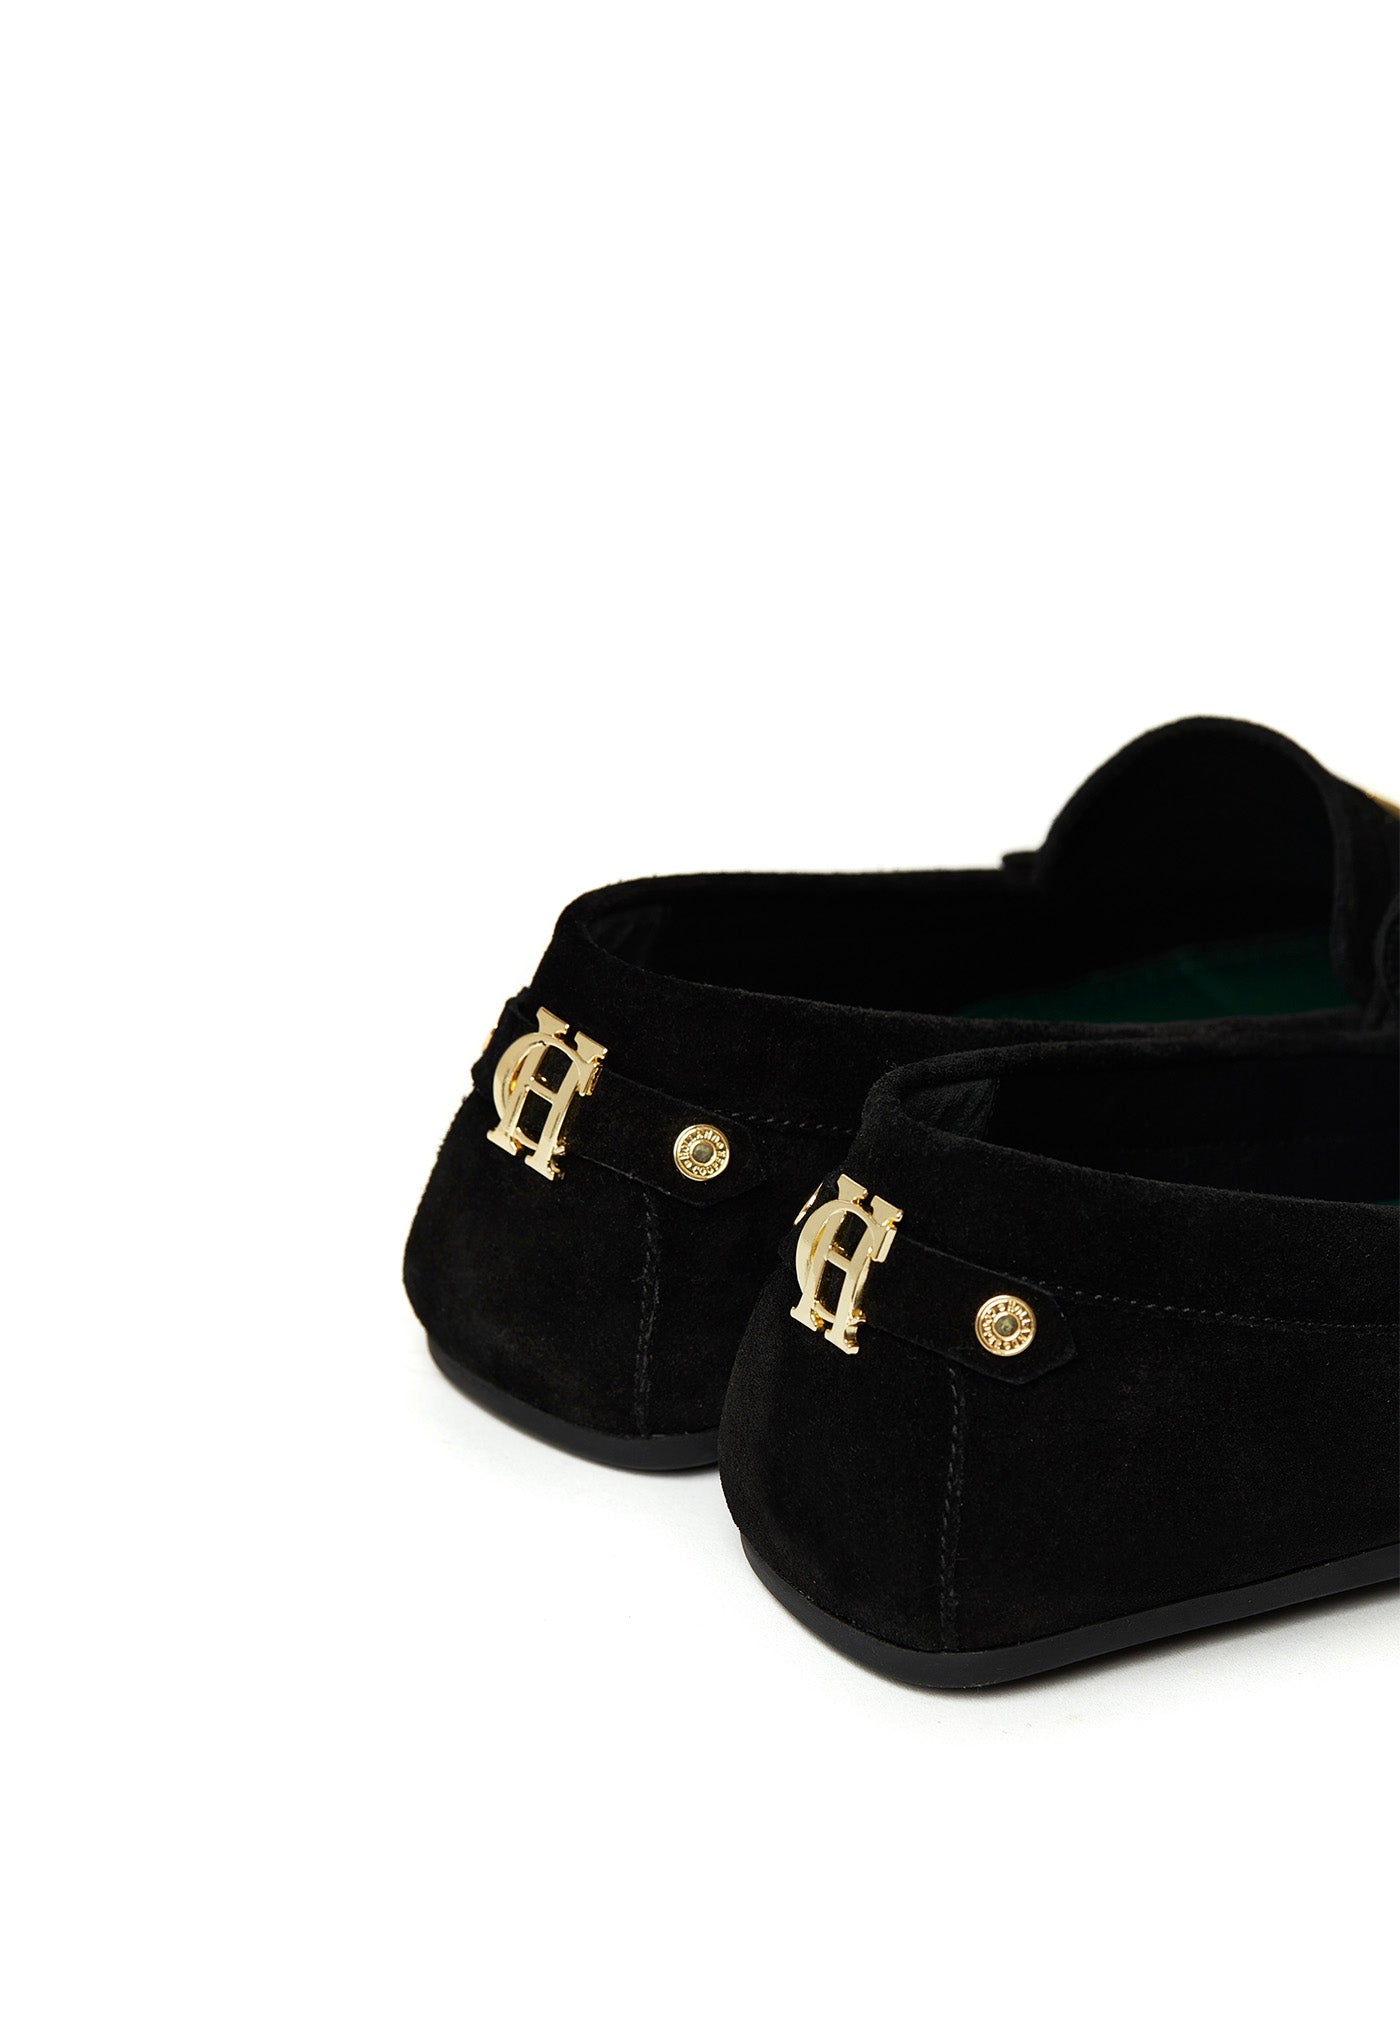 The Driving Loafer - Black sold by Angel Divine